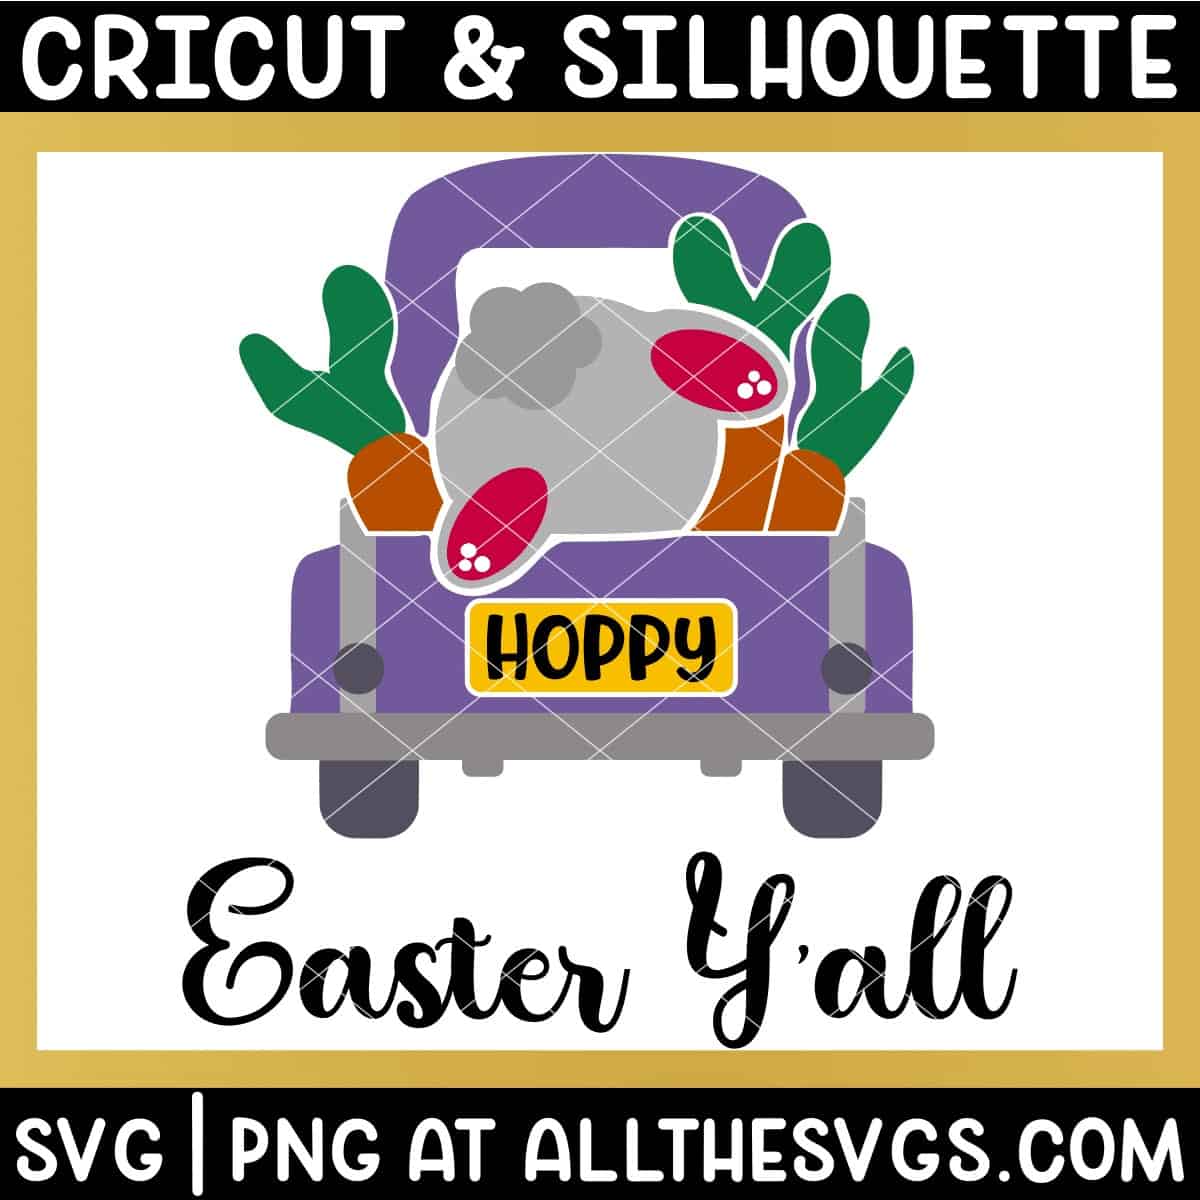 hoppy easter truck with bunny bottom, carrots svg file.